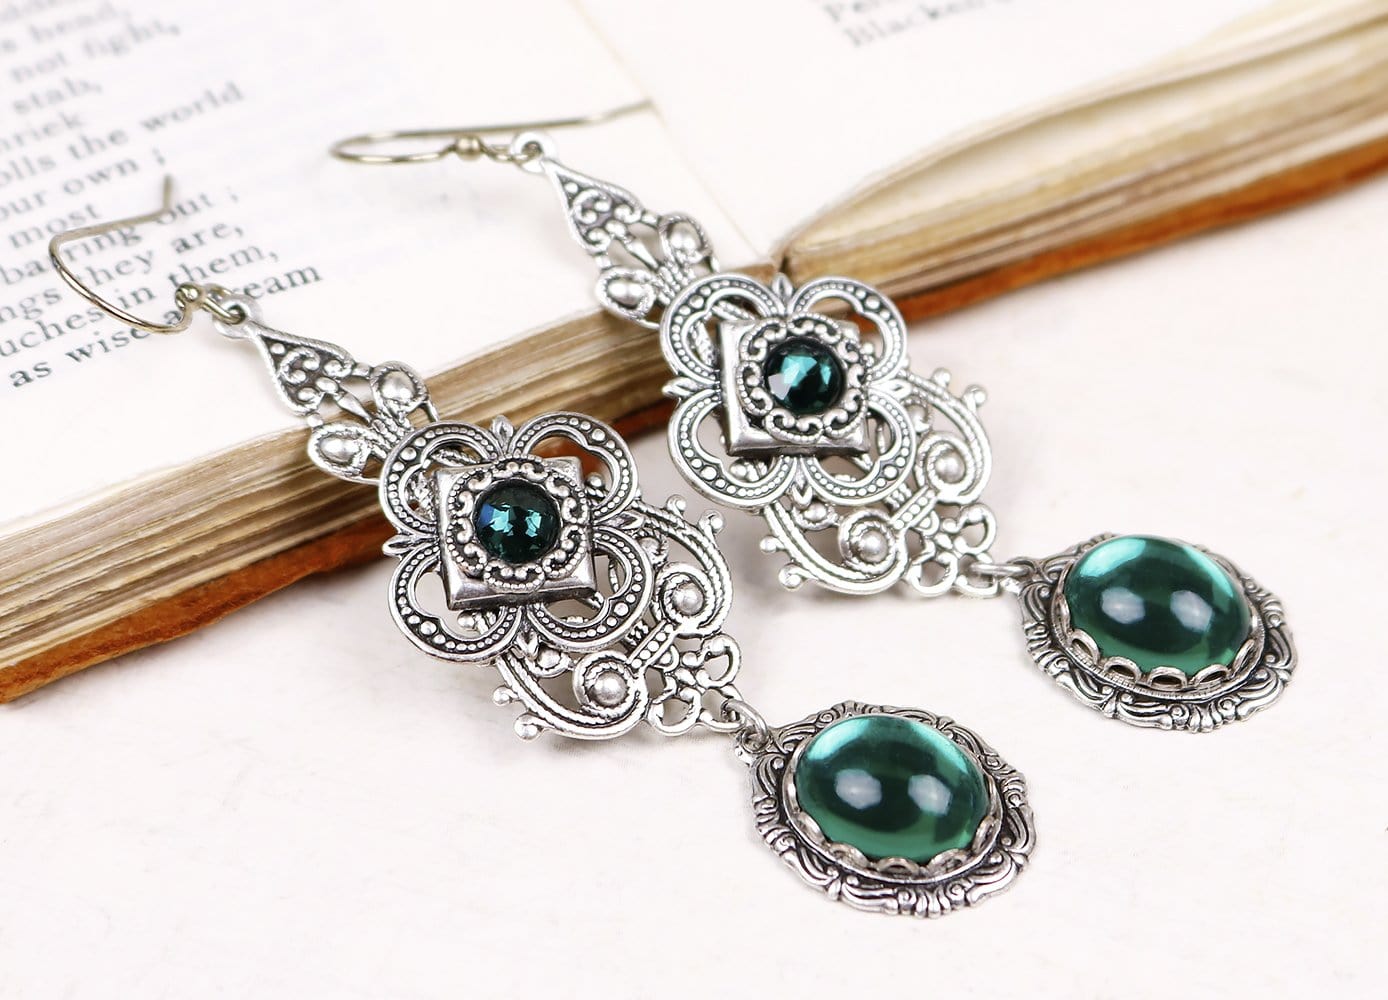 Avalon Earrings in Emerald and Antiqued Silver by Rabbitwood & Reason